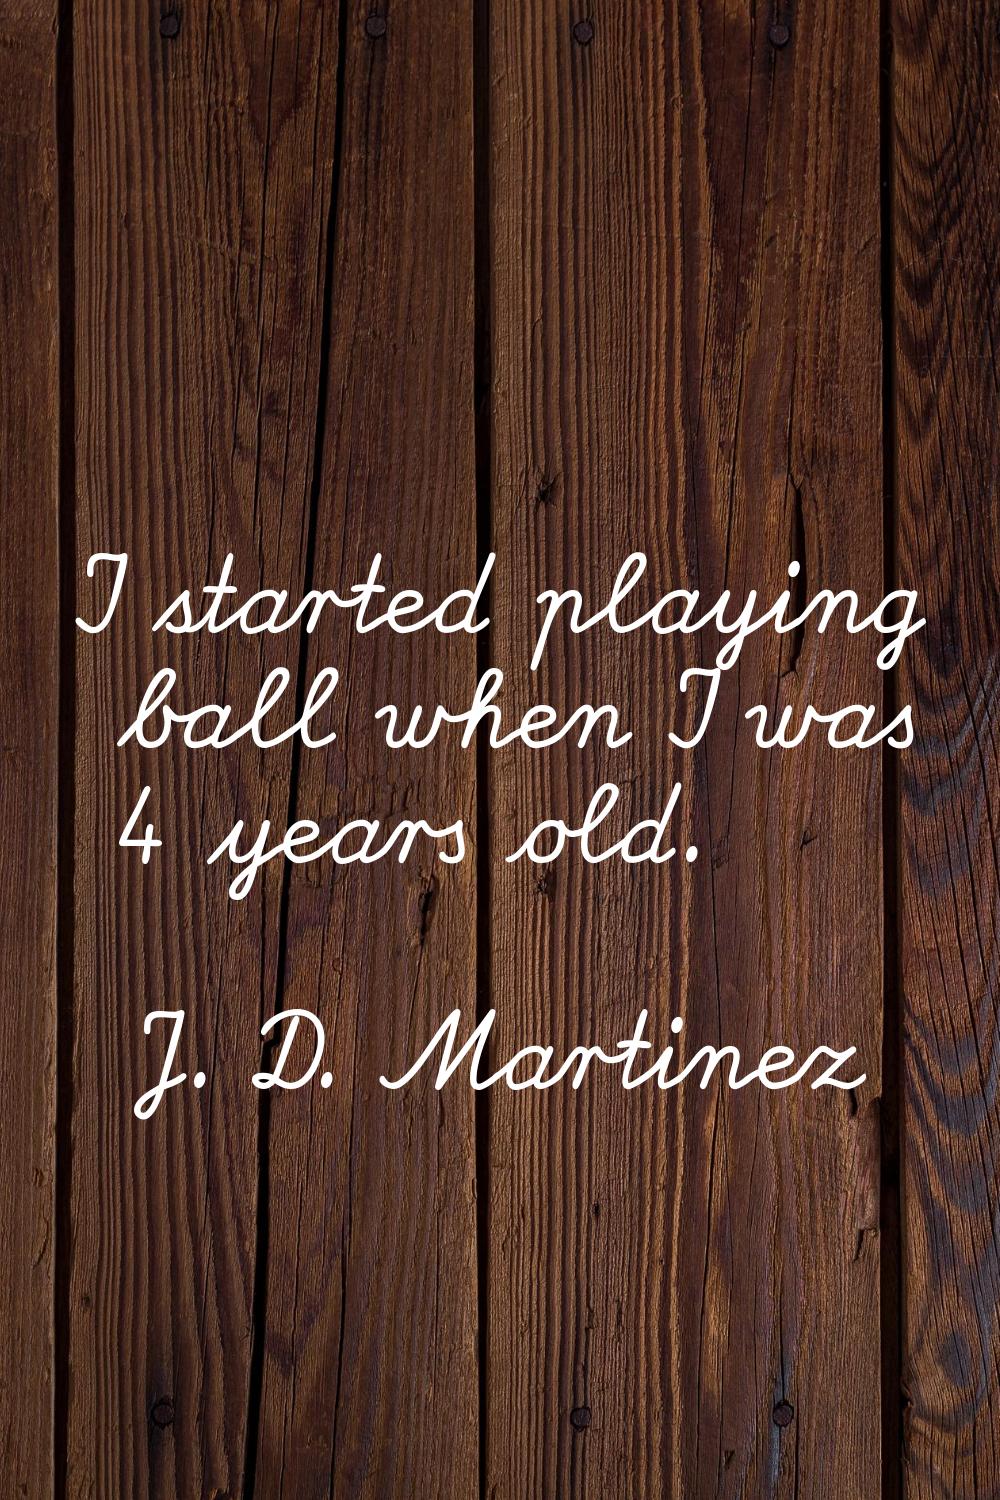 I started playing ball when I was 4 years old.